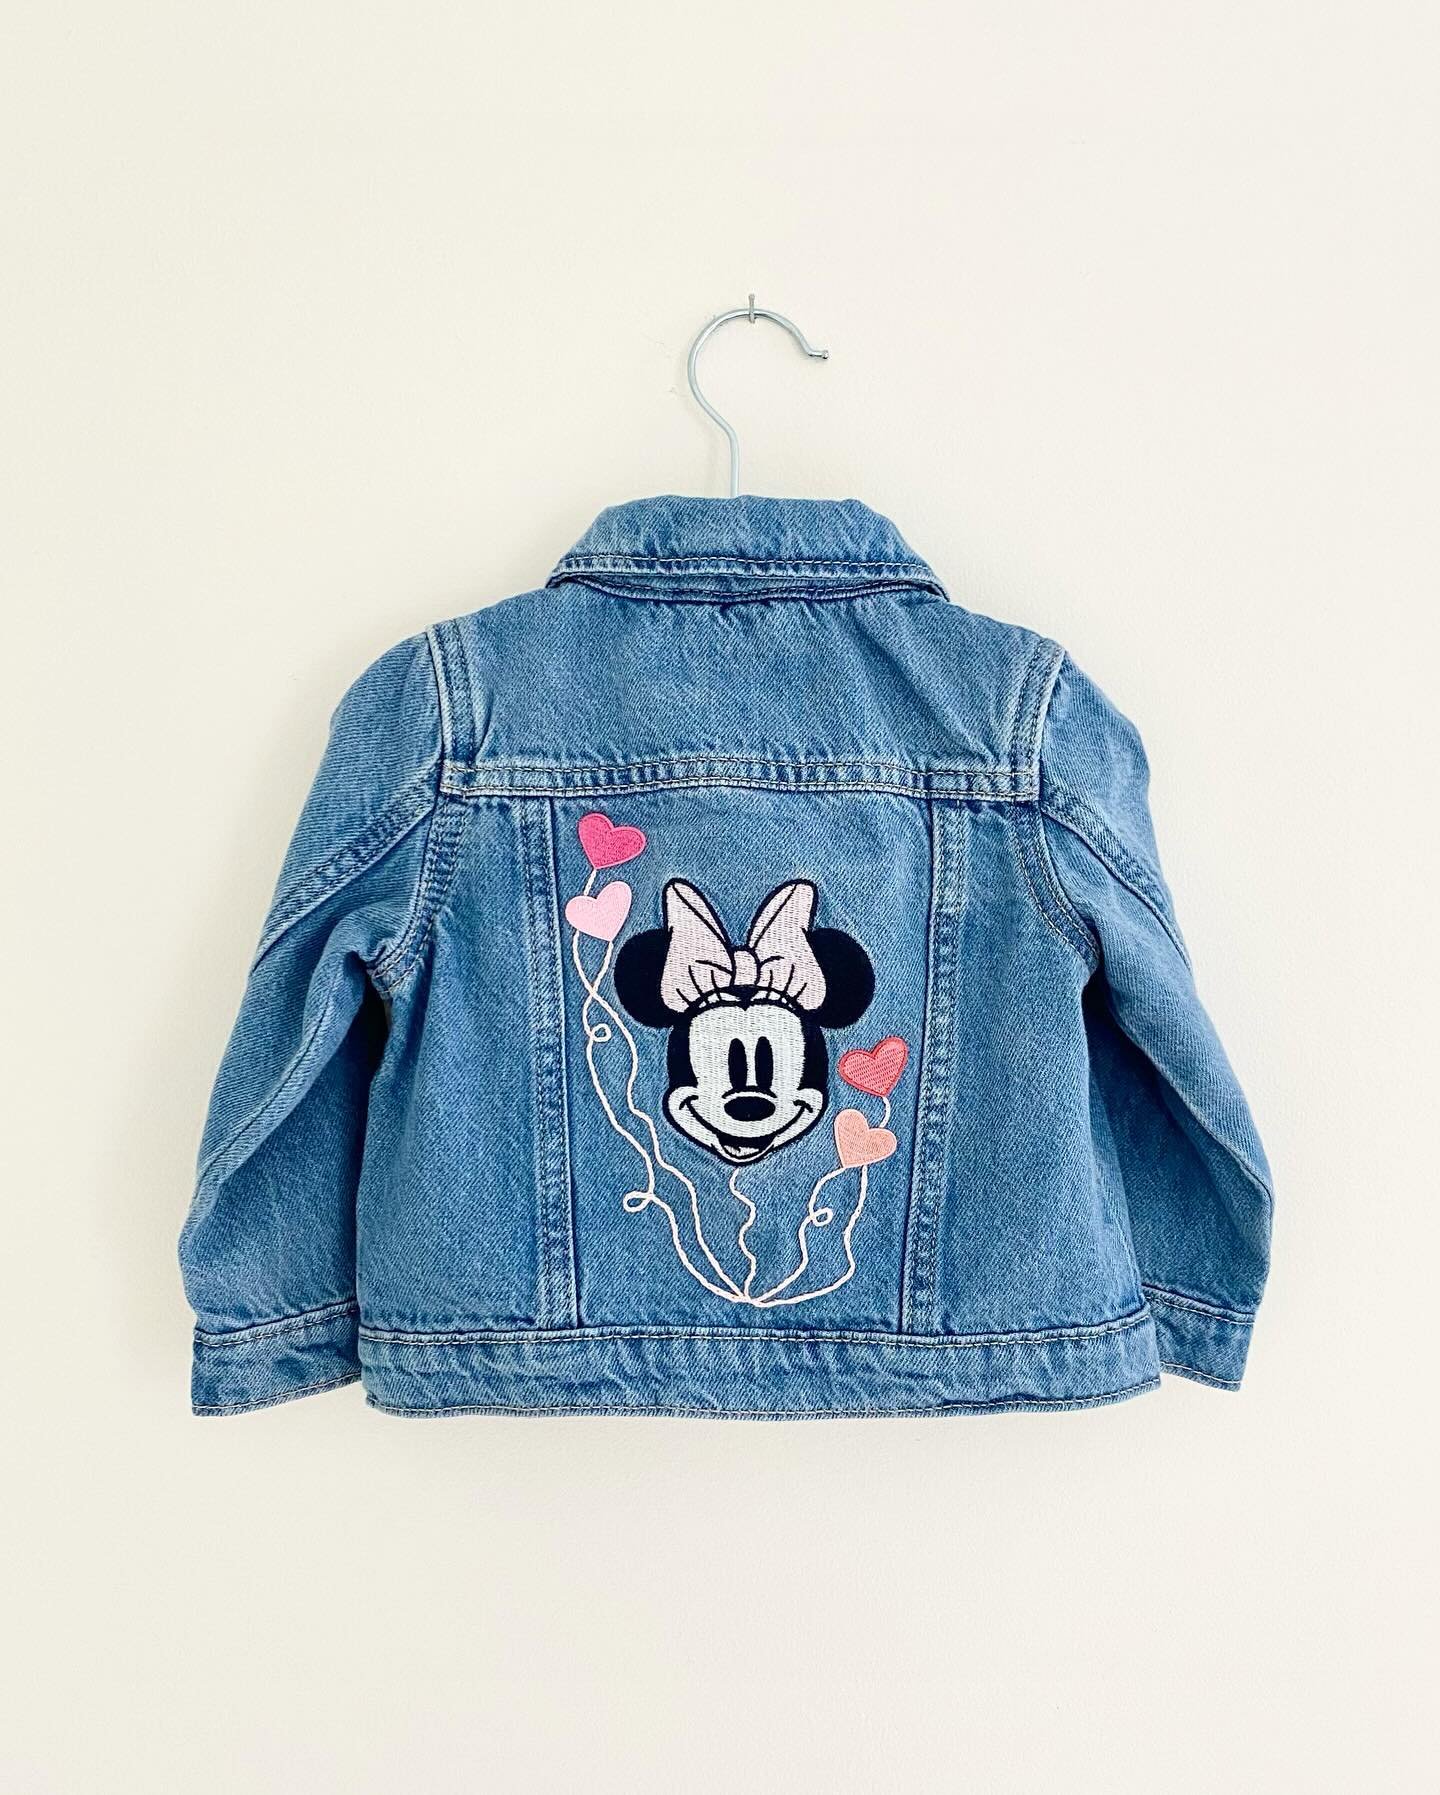 Minnie Denim for a California girl! This has Disney Land written all over it 🌟💕🎈

Happy 1 year Harper! 💜